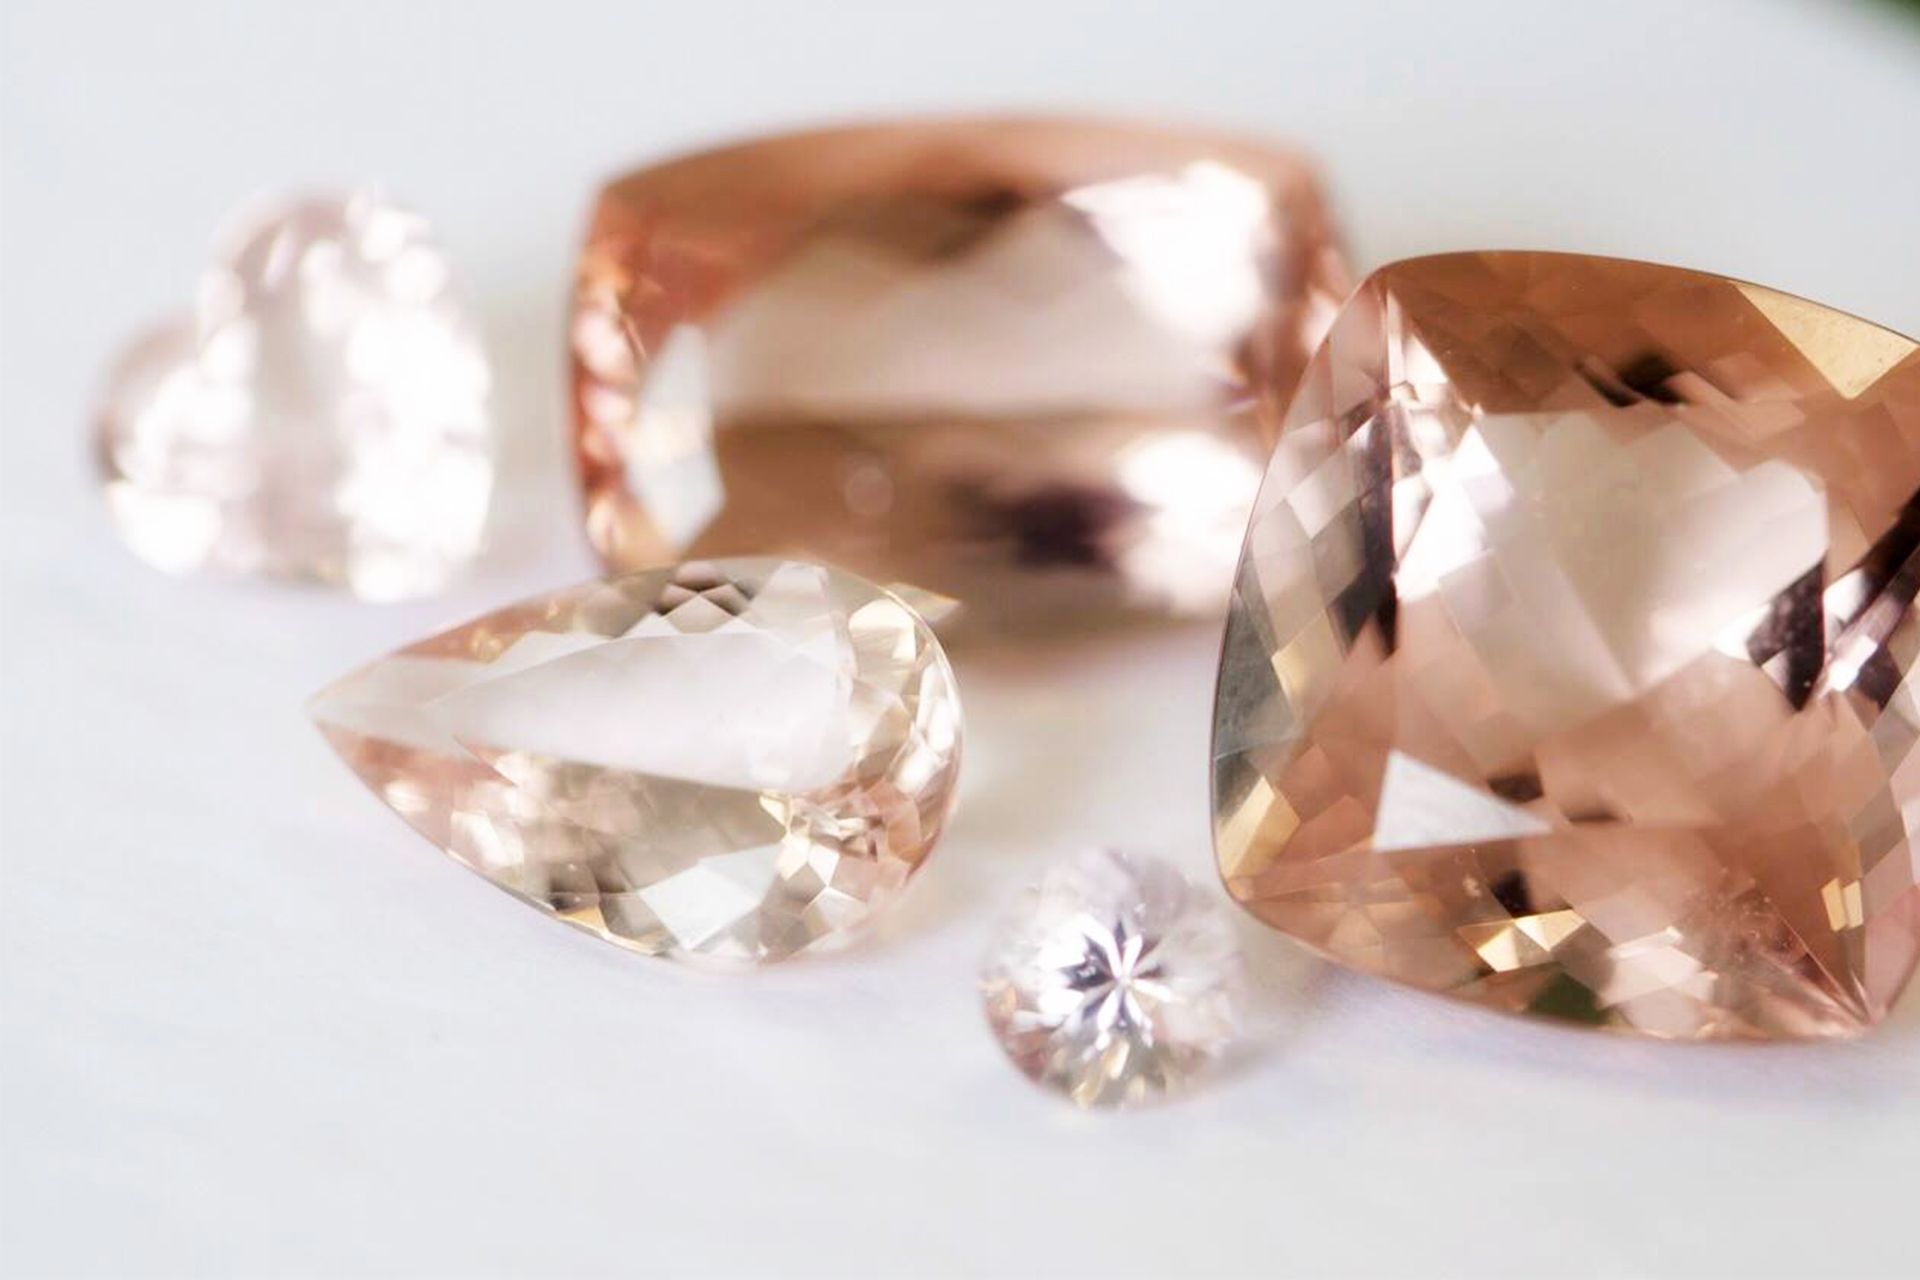 A collection of varied cuts of Morganite stones on a flat surface.